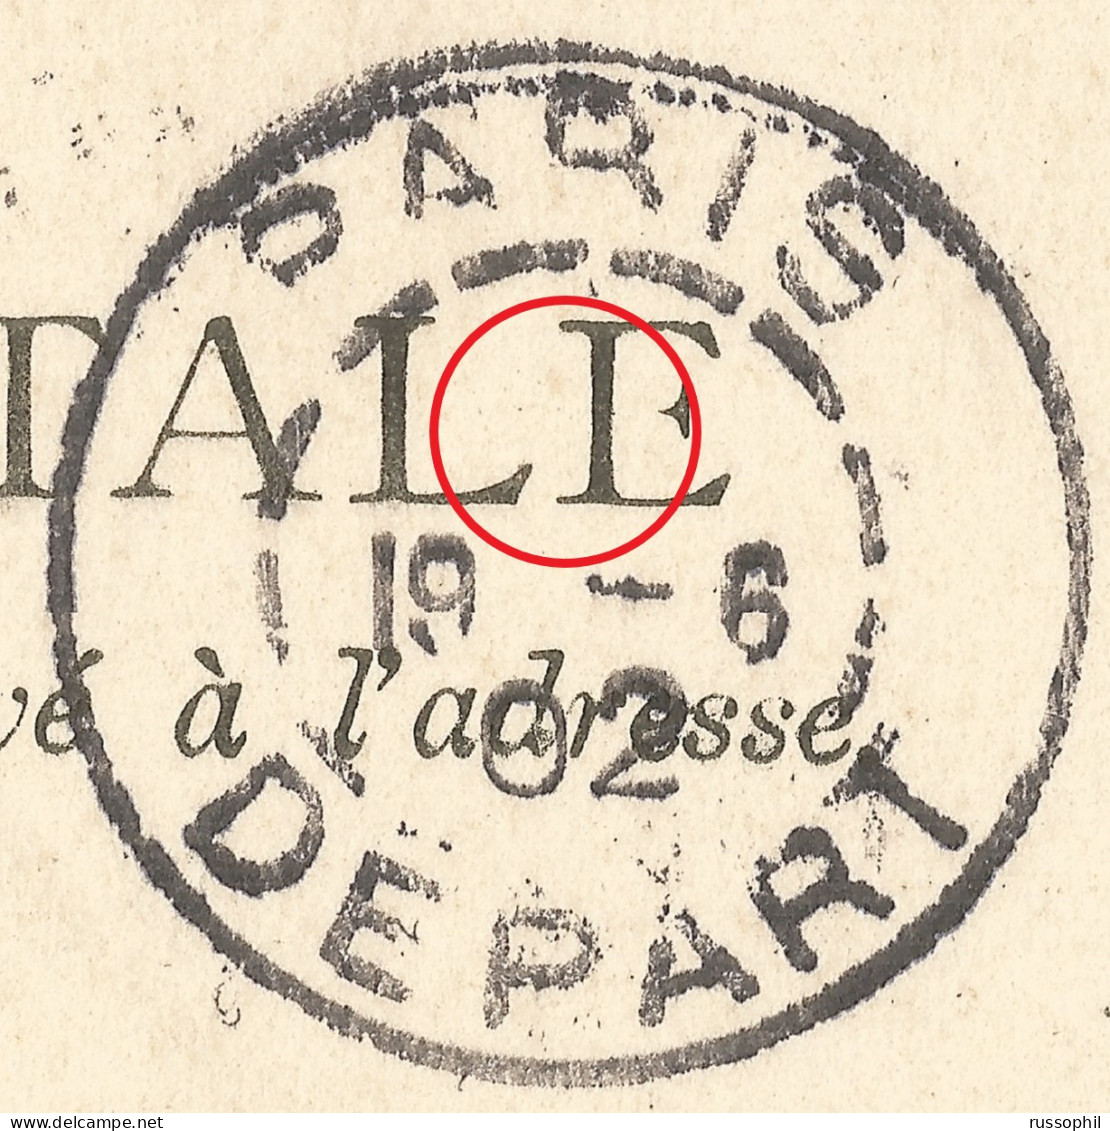 FRANCE - VARIETY &  CURIOSITY - 75 - A3 DEPARTURE CDSs "PARIS DEPART"  ON PC - HOUR MISSING IN DATE BLOCK - 1902 - Lettres & Documents